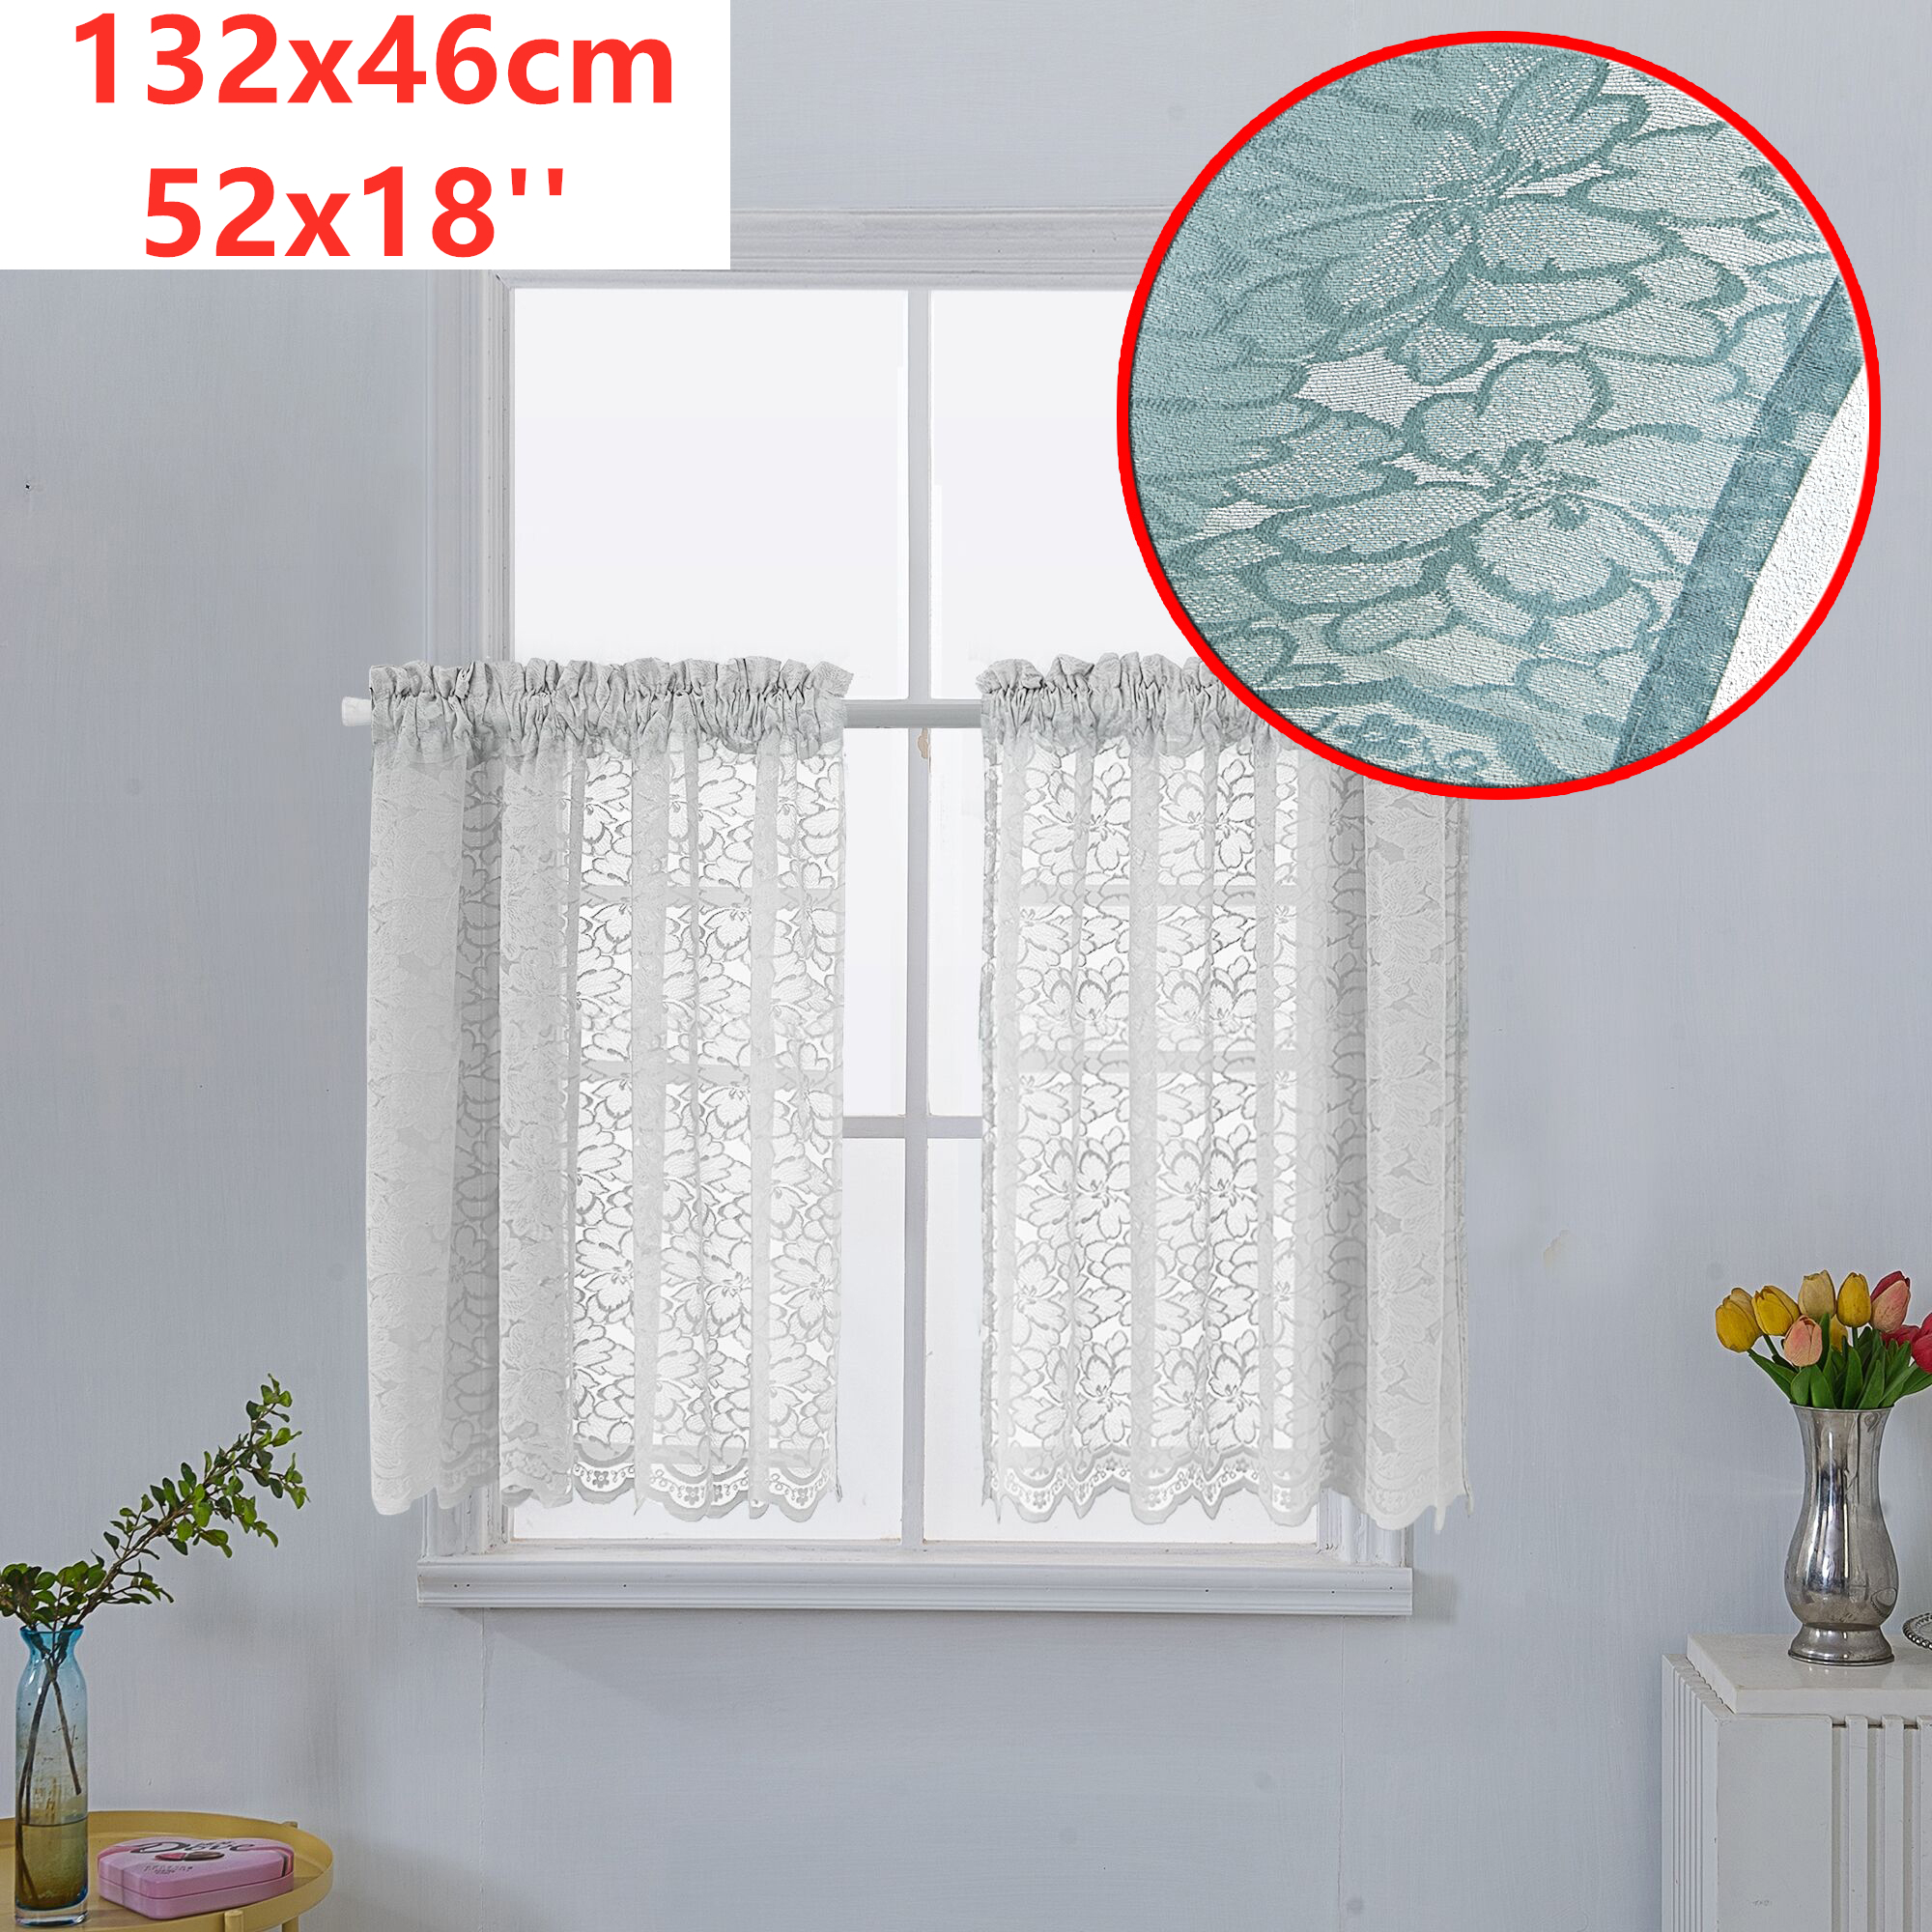 Floral Lace Sheer Net Short Curtain Cafe Kitchen Tulle Scarf Voile Drape Panel 